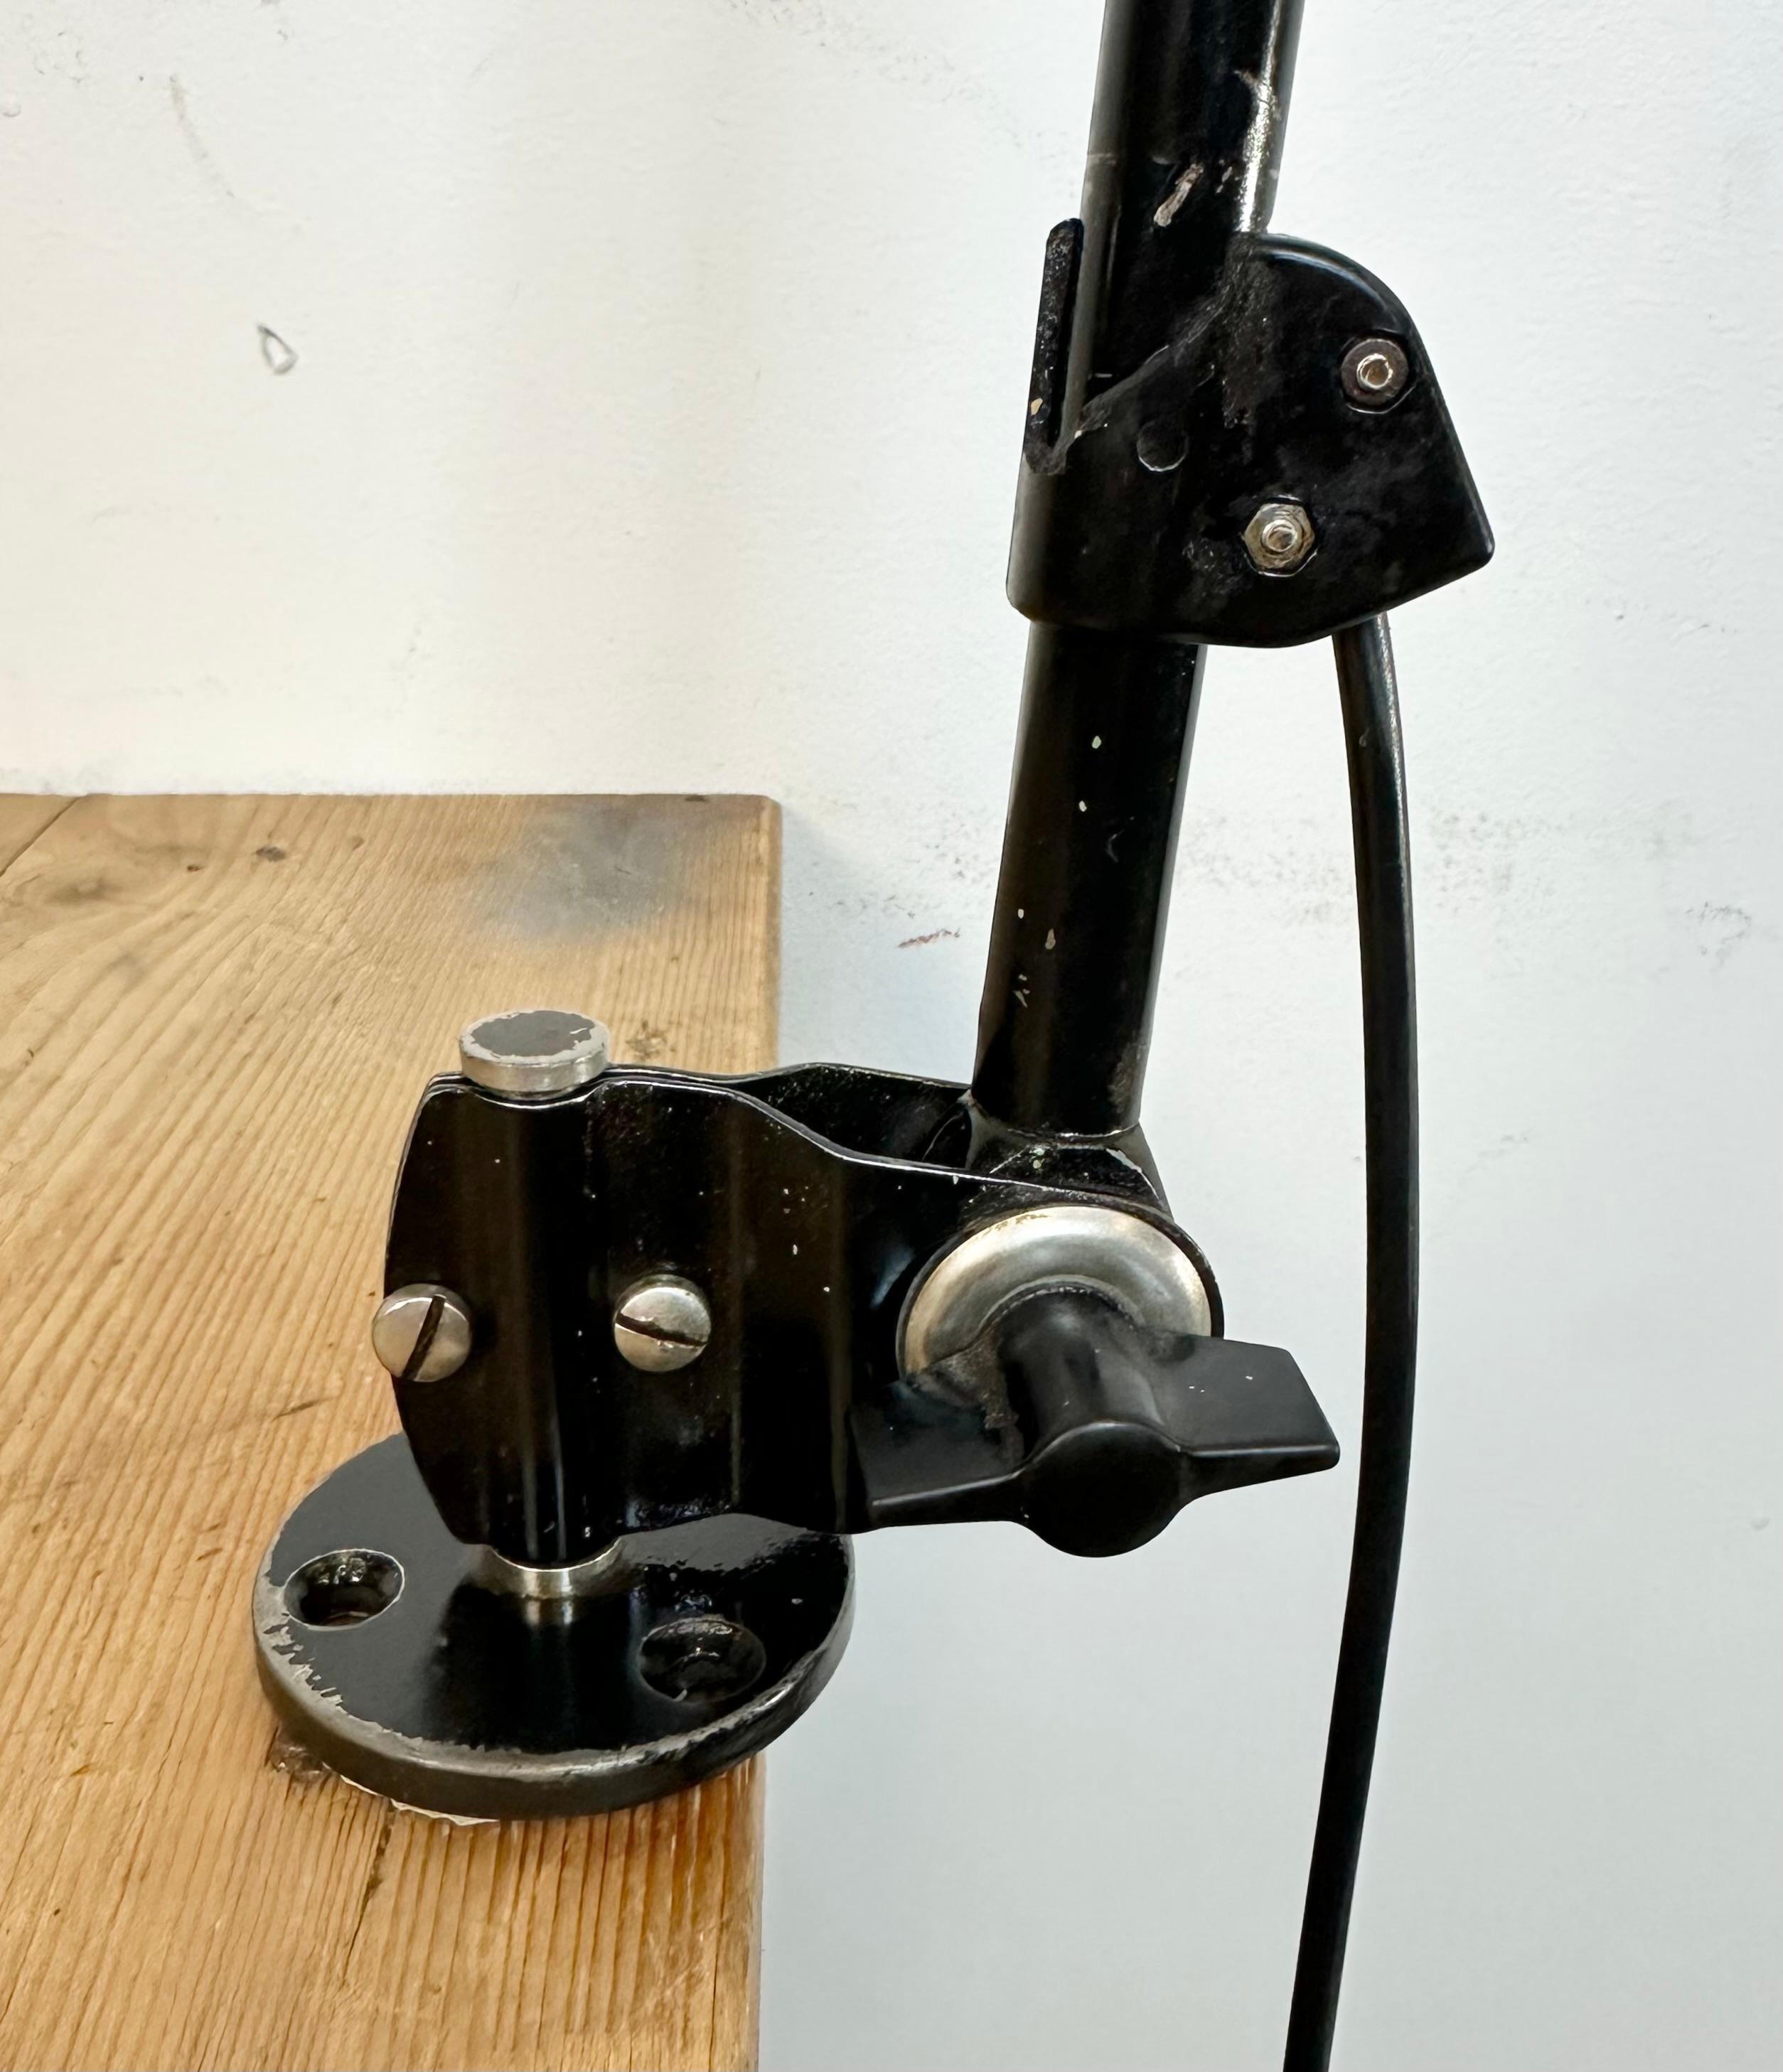 Iron Industrial DDRP Desk or Wall Lamp by Curt Fischer for Midgard, 1930s For Sale